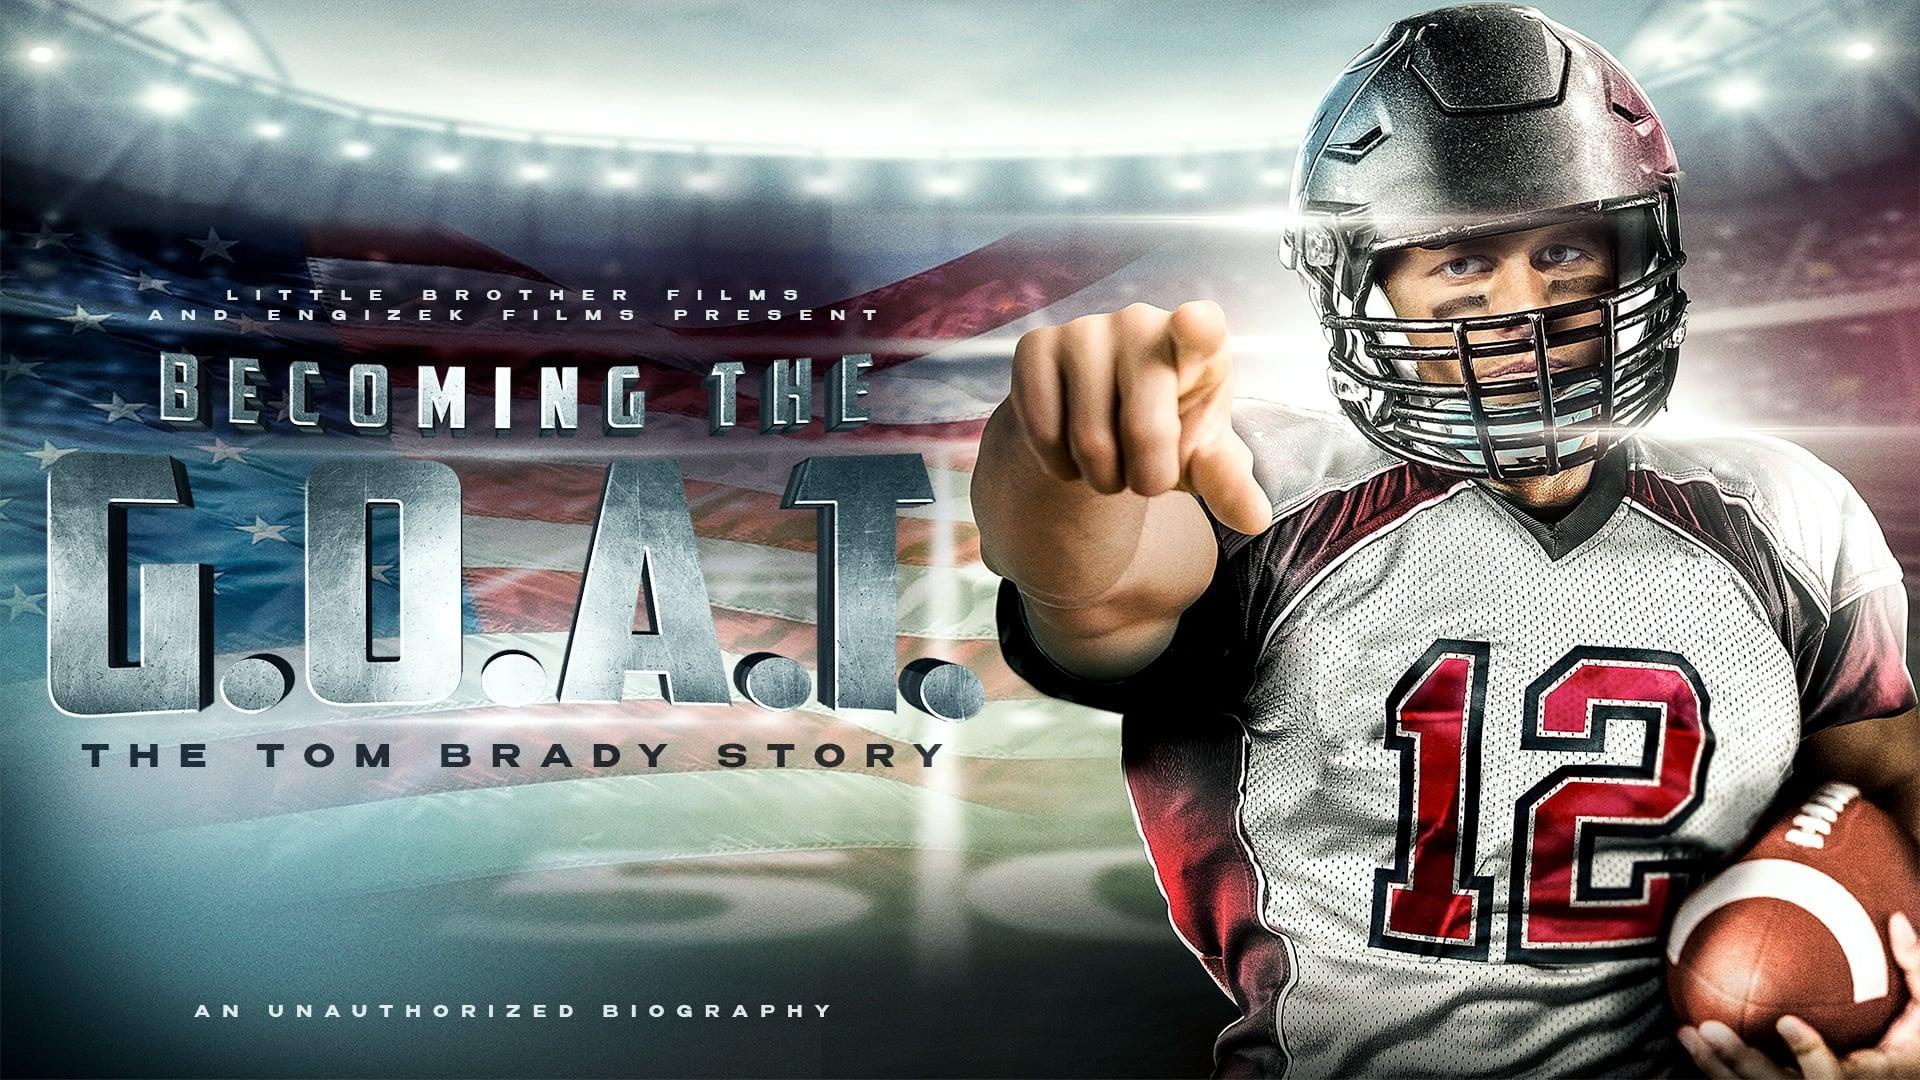 Becoming the G.O.A.T.: The Tom Brady Story backdrop